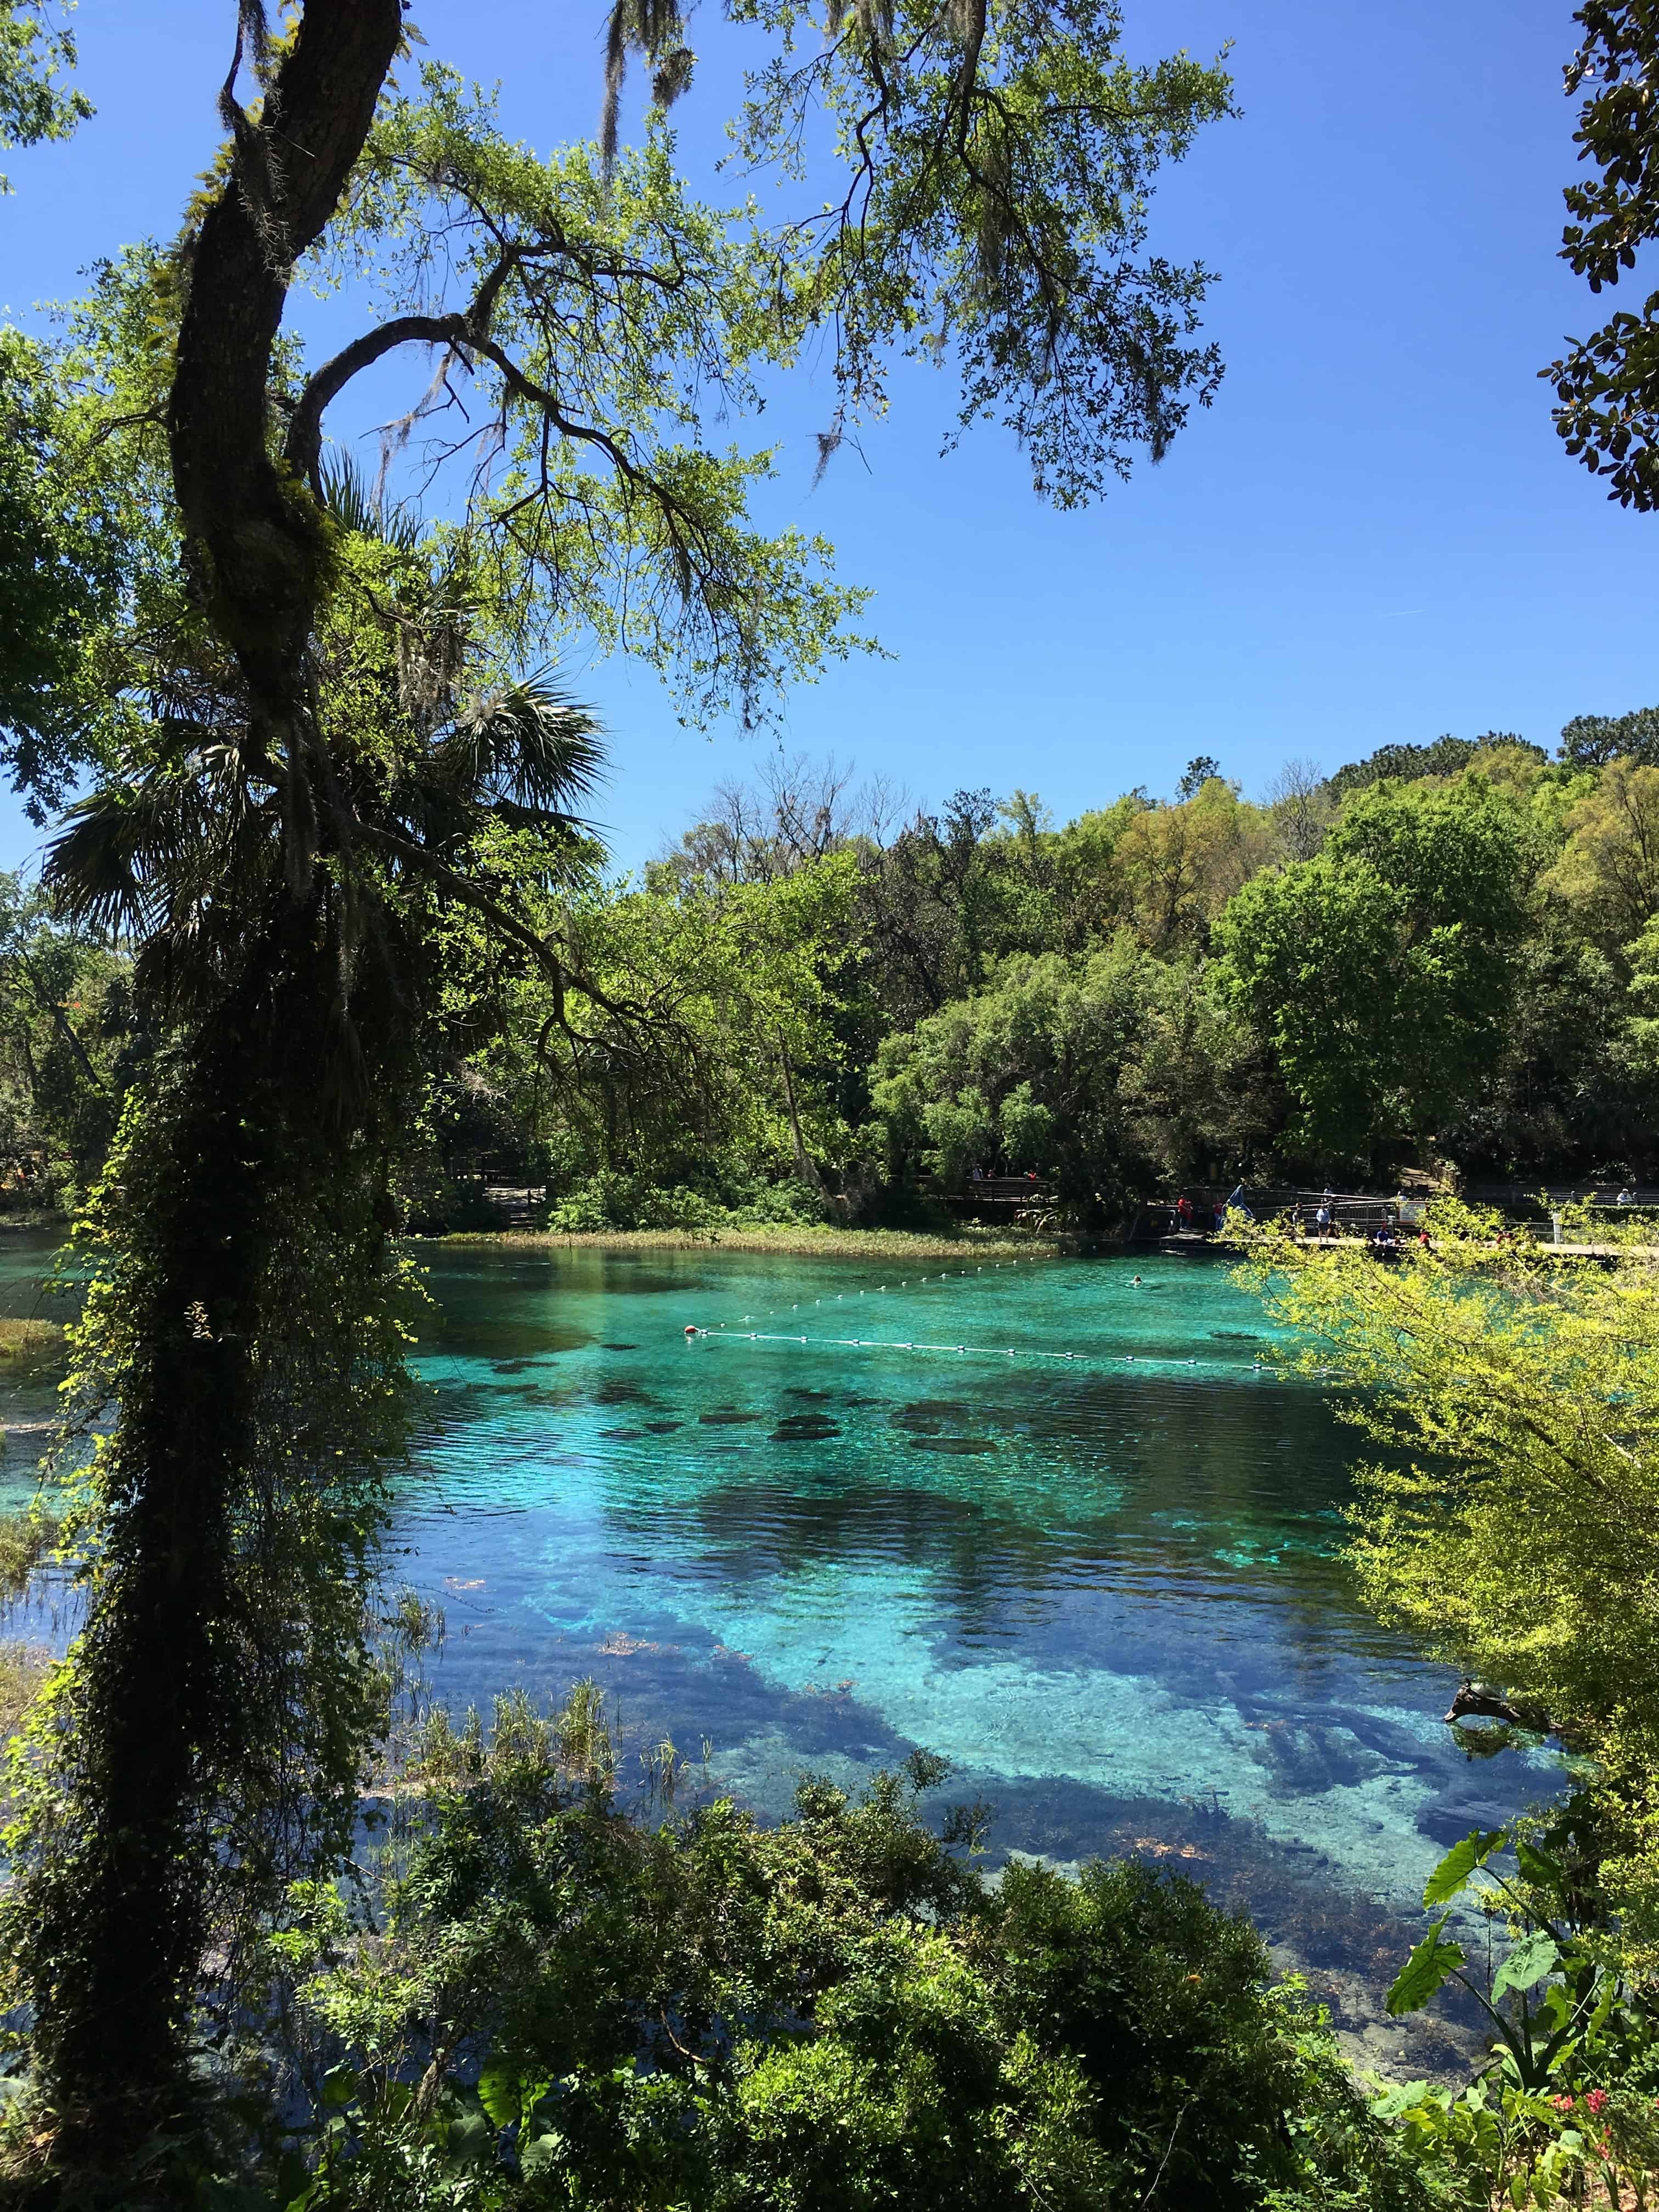 The natural freshwater springs at Rainbow Springs State Park produce more than 400 gallons on crystal clear water per day. Enjoy a dip in the refreshing water or a peaceful walk among nature at this Florida State Park.